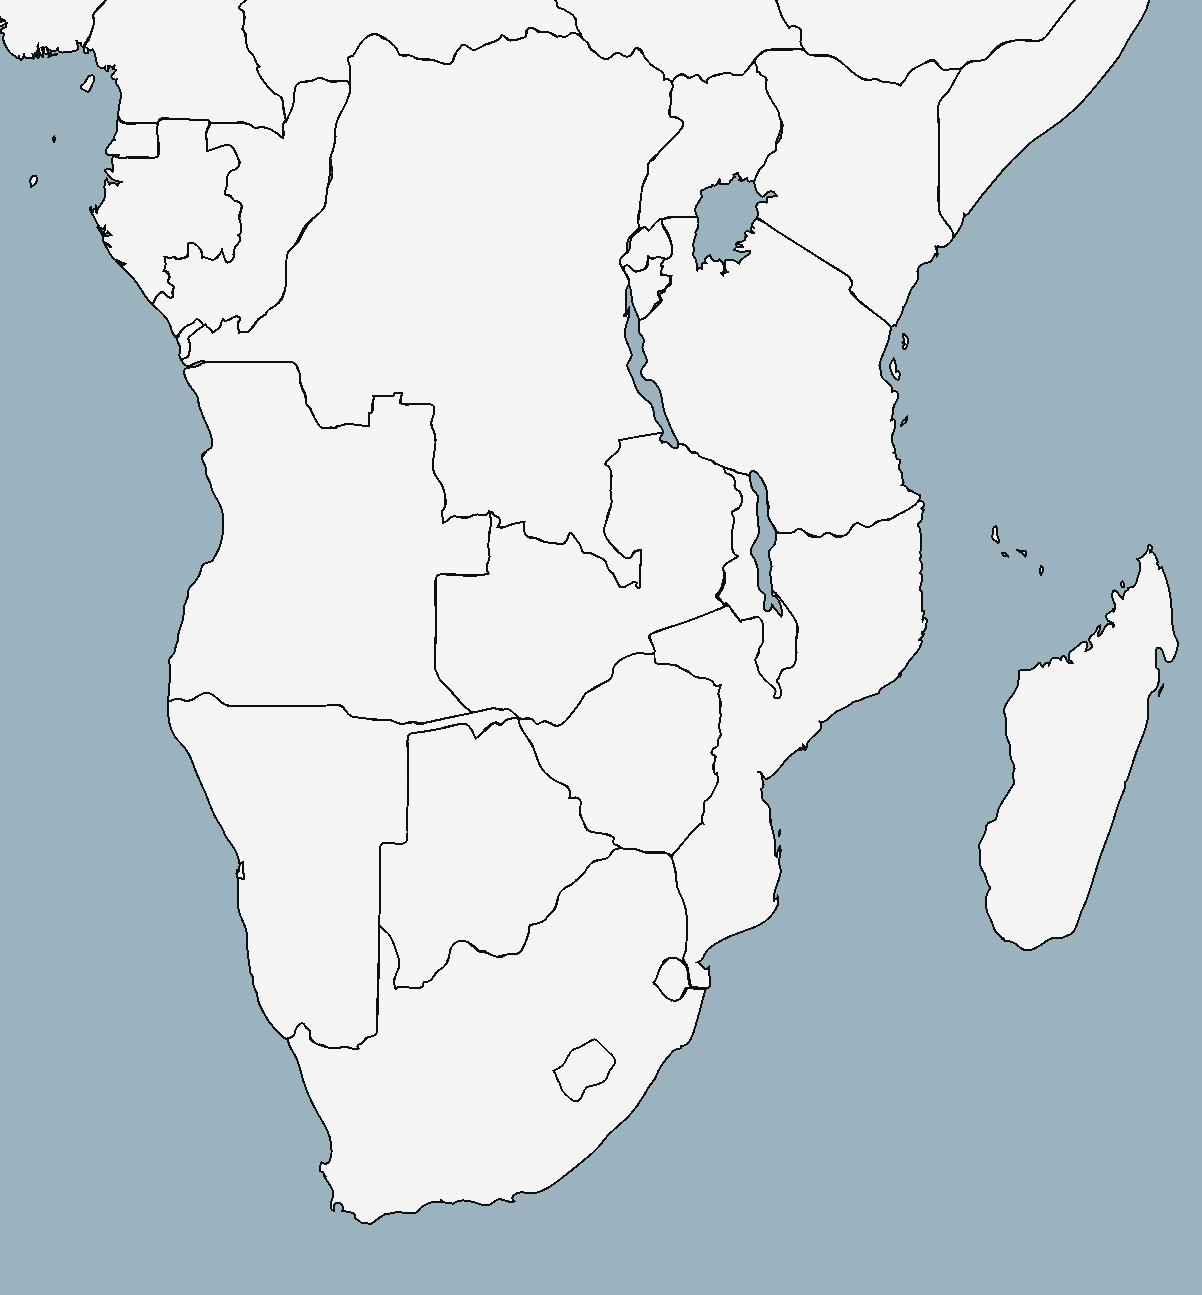 29 Blank Physical Map Of Africa - Maps Database Source